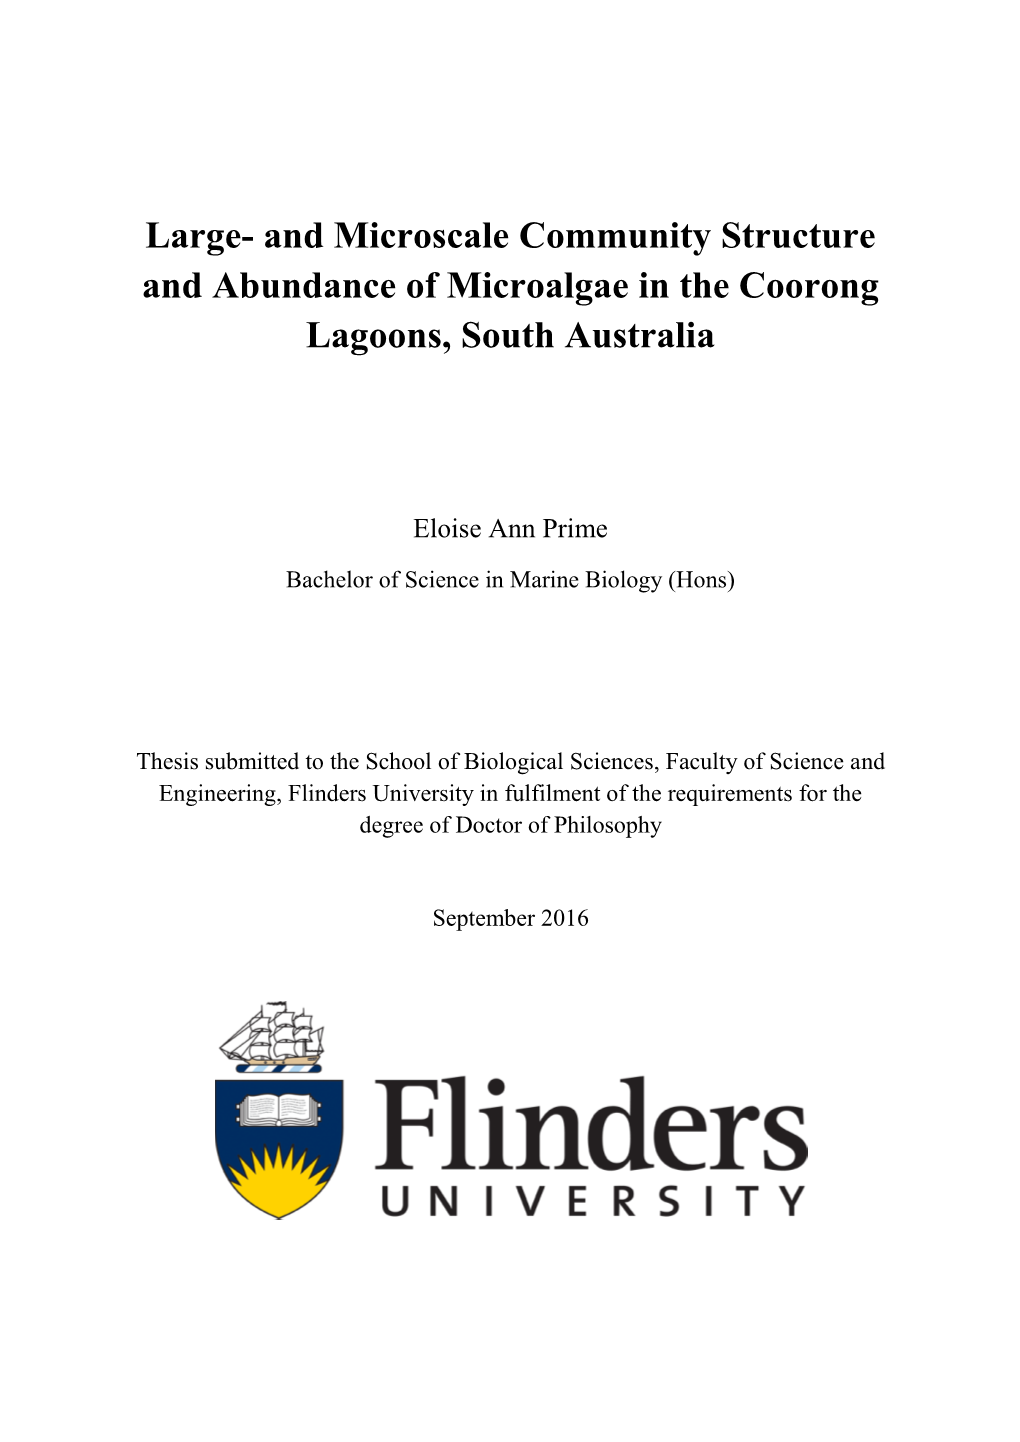 And Microscale Community Structure and Abundance of Microalgae in the Coorong Lagoons, South Australia